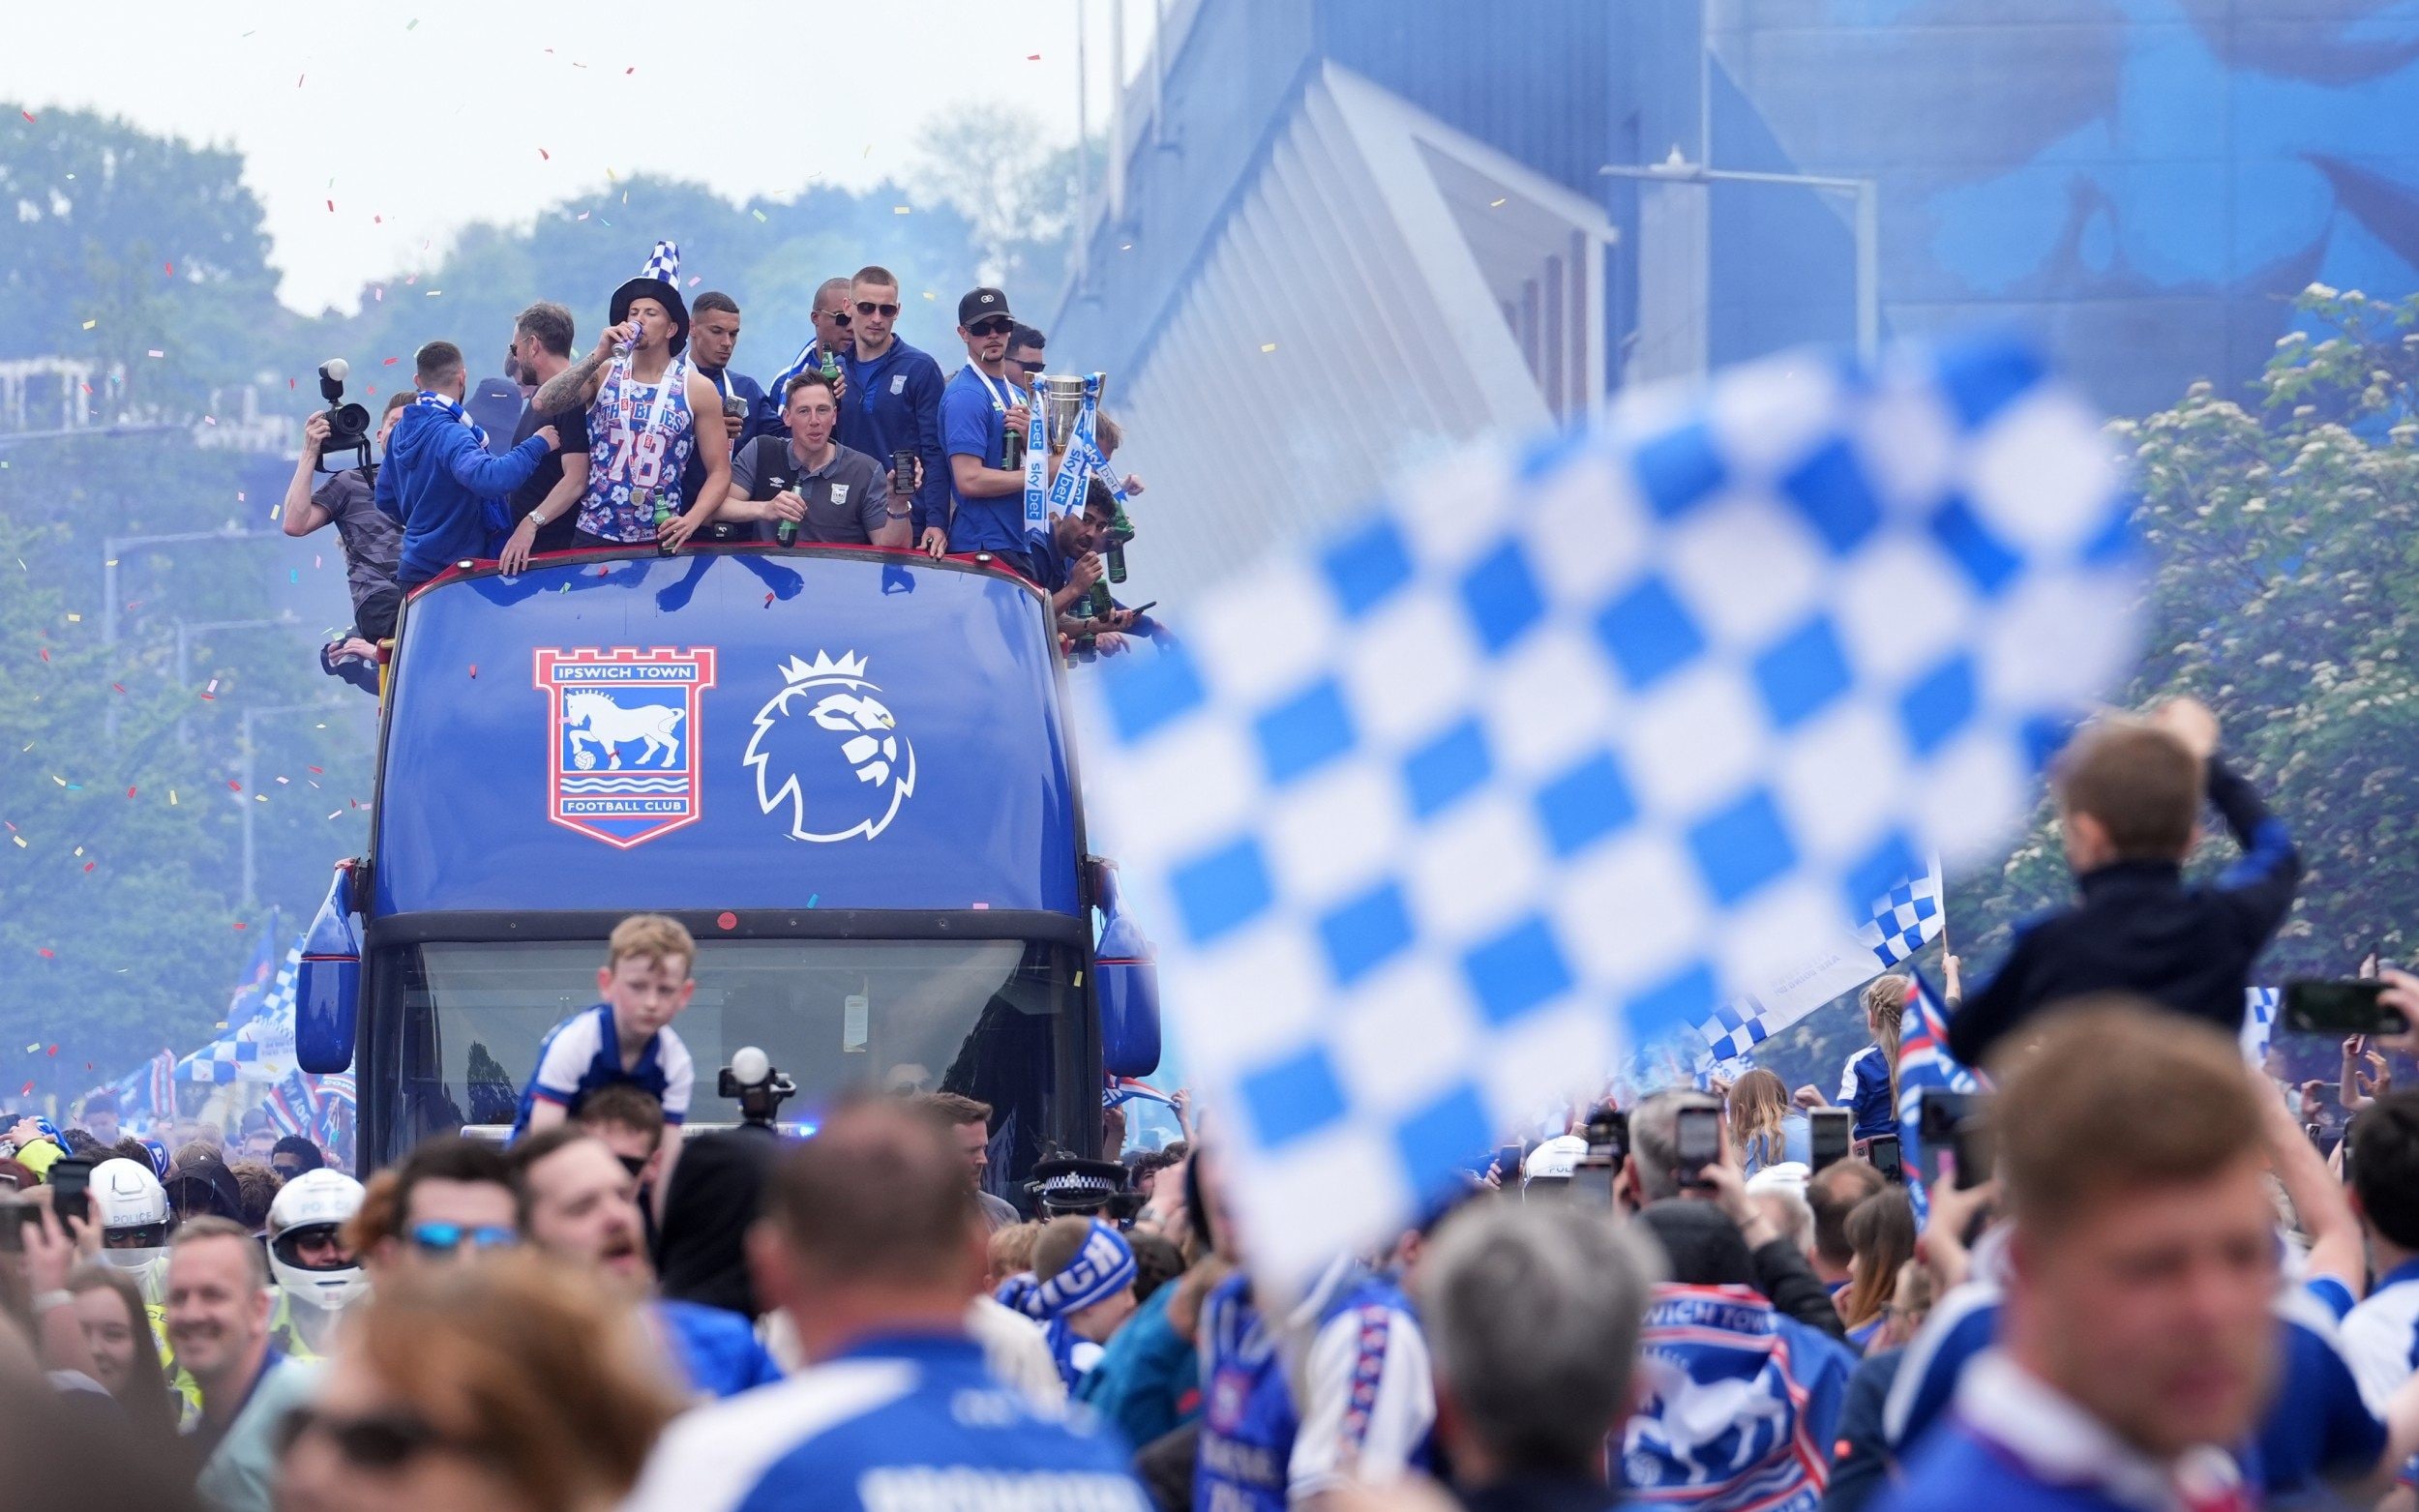 ipswich take aim at sky sports pundit and leeds during promotion parade